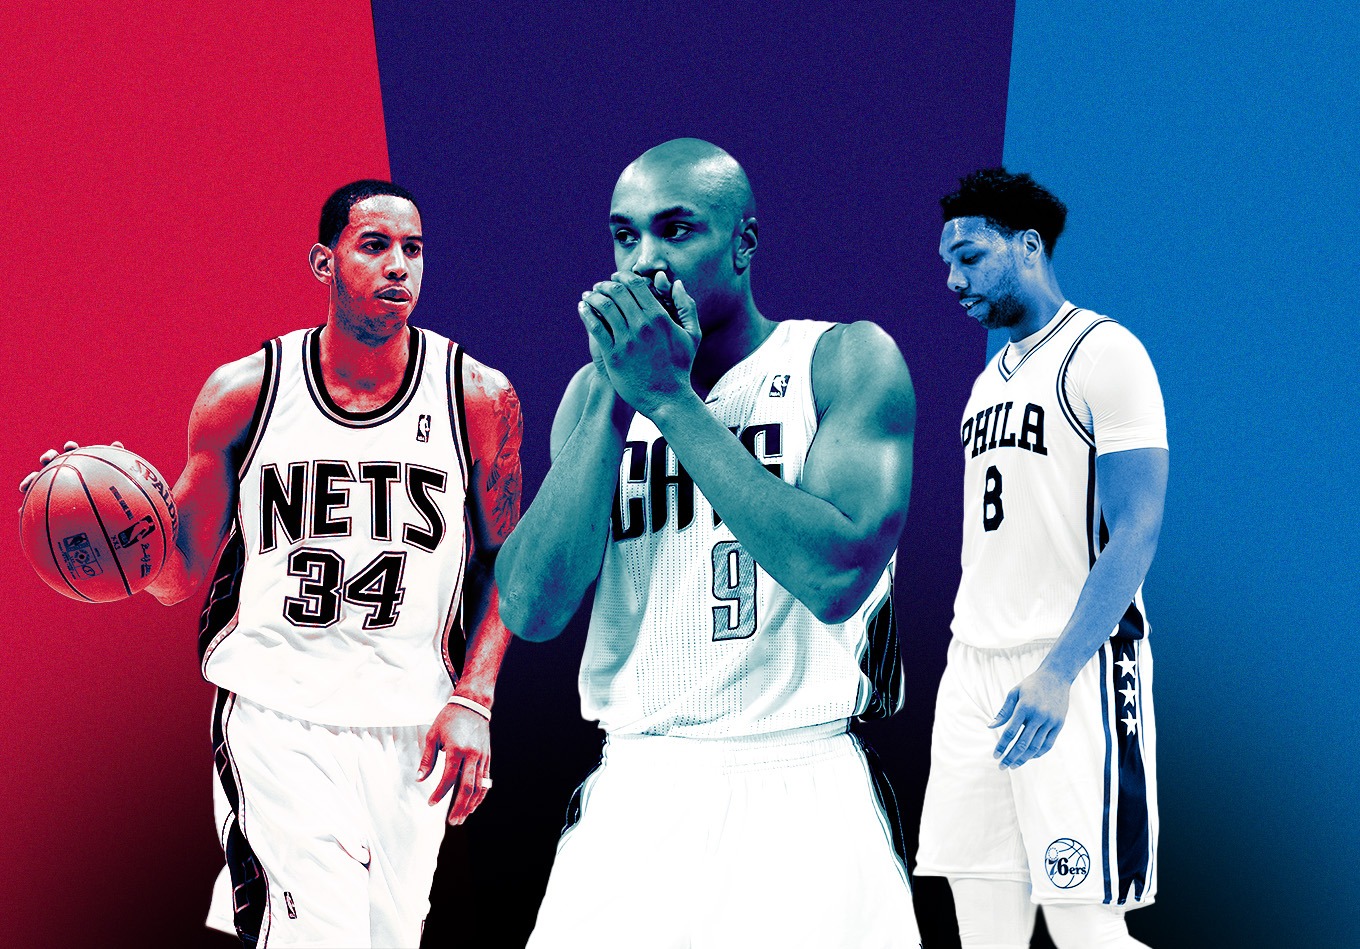 How Low Did They Go: The Teams With the Worst Records in an NBA Season by (Lack of) Winning Percentage